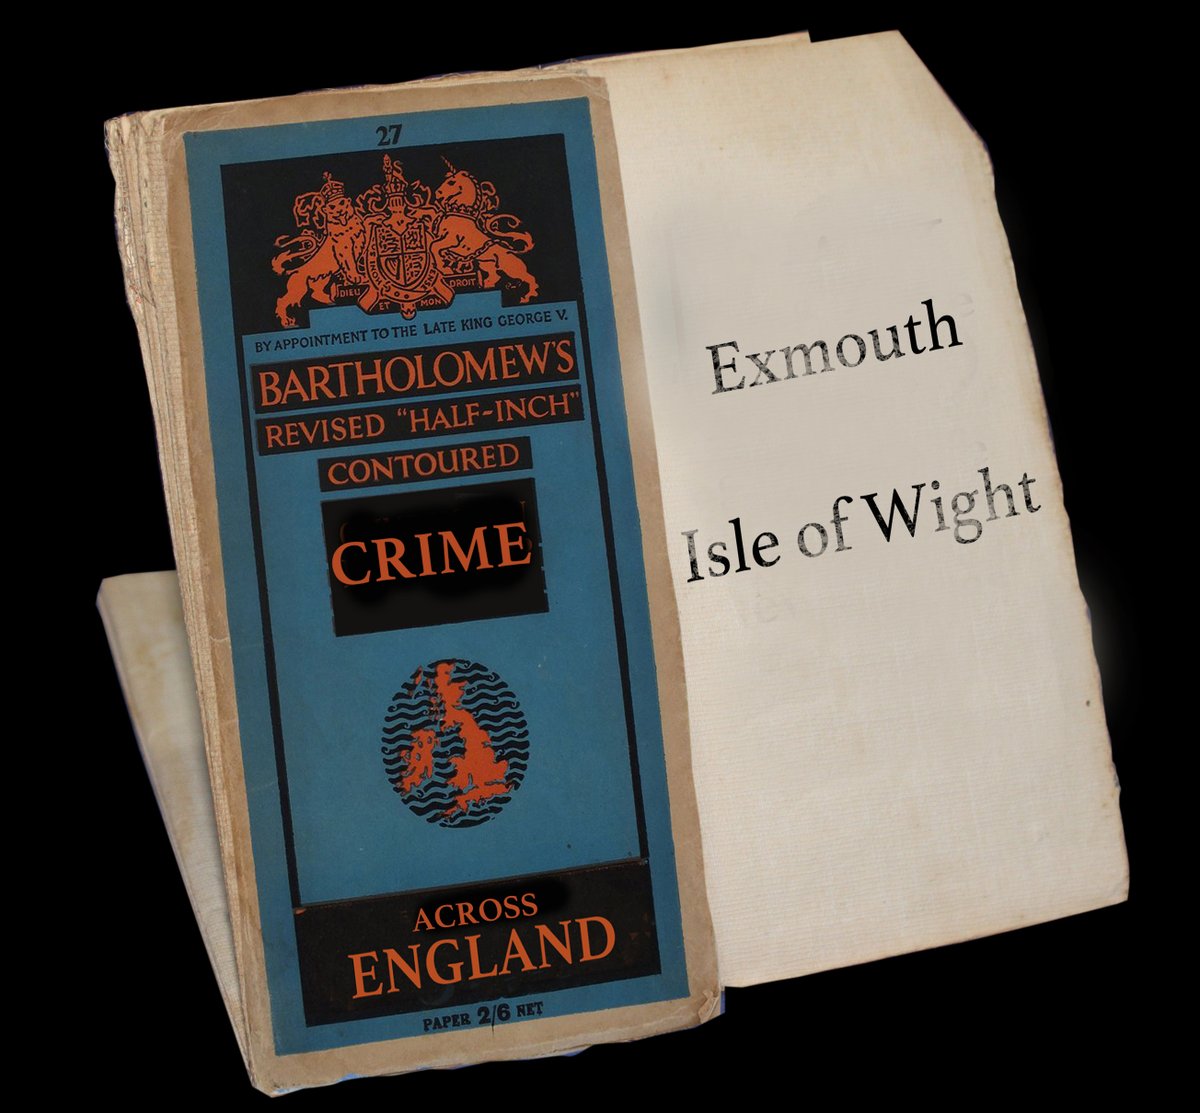 Tonight, Crime Across England (7) We visit Jimmy Suttle @Seasidepicture in Exmouth and Peter' Mad Max' Maxwell on the Isle of Wight #MJTRow @MaryanneColeman fullybooked2017.com/2021/11/17/cri…